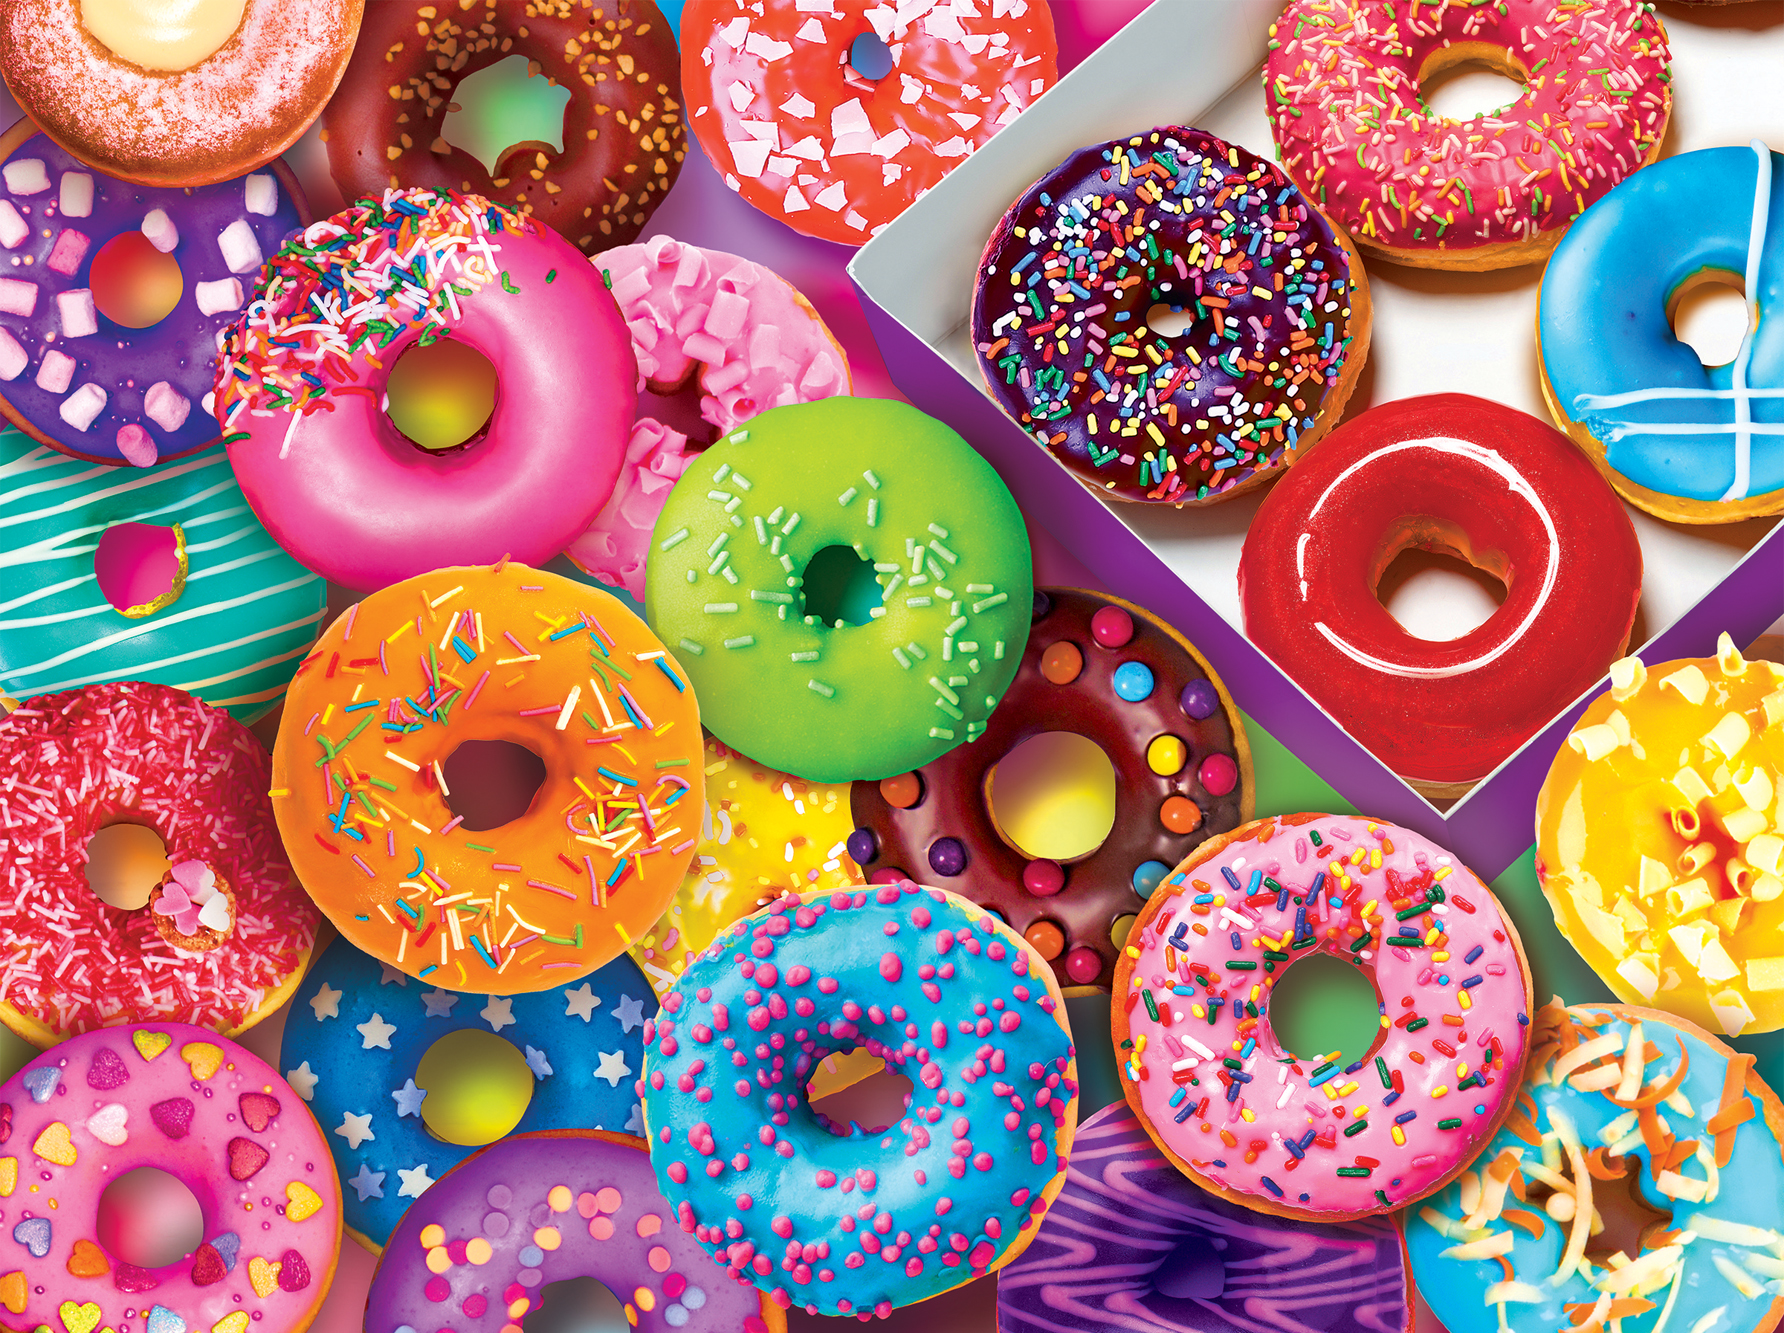 Cra-Z-Art Yummy Puzzles 300-Piece I Love Donuts Jigsaw Puzzle - image 4 of 6